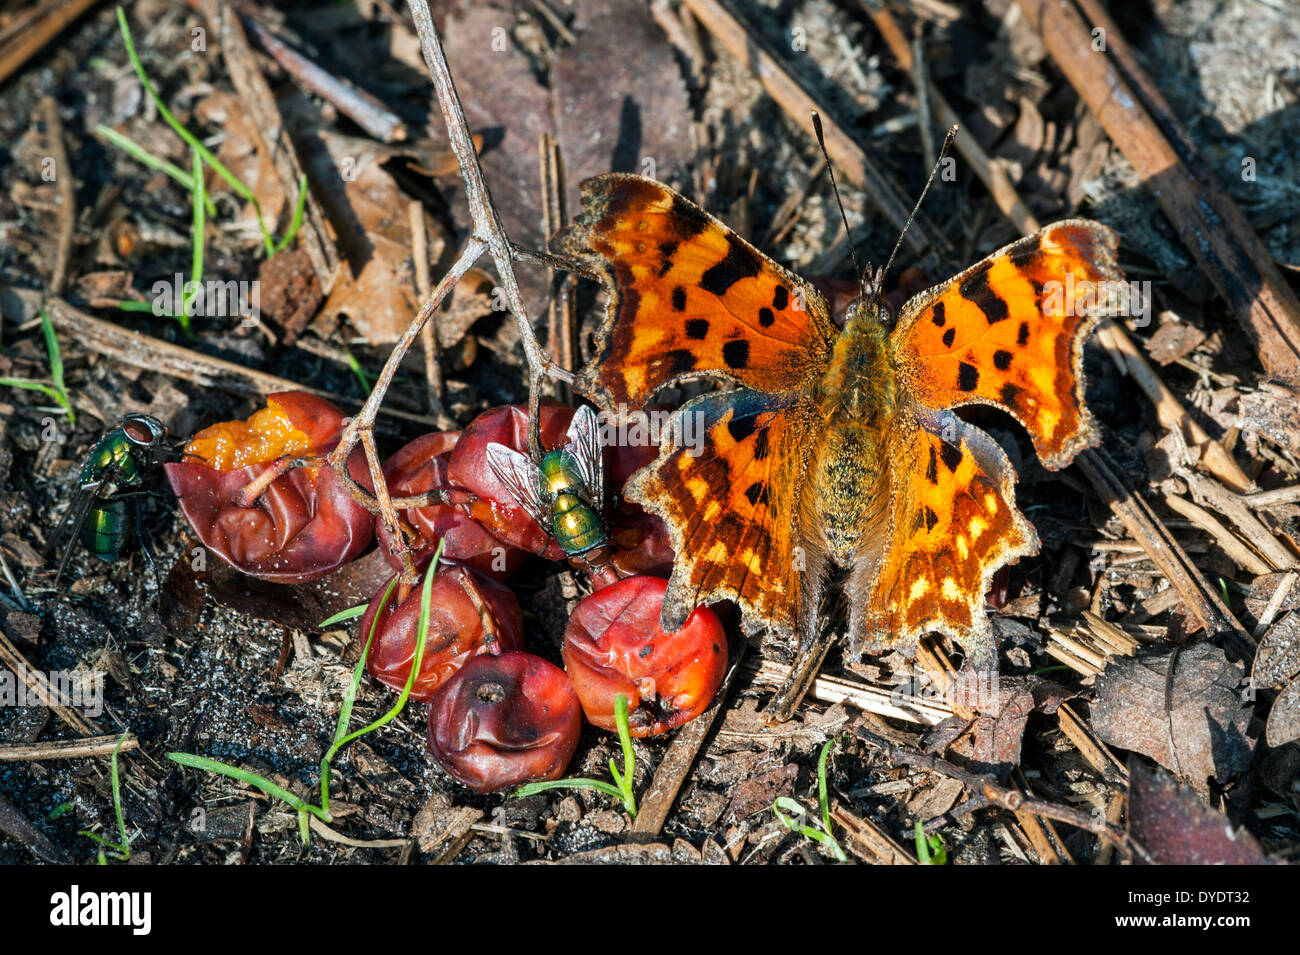 Comma butterfly (Polygonia c-album) and greenbottle flies (Lucilia caesar) feeding on rotten berries of rowan / mountain-ash Stock Photo